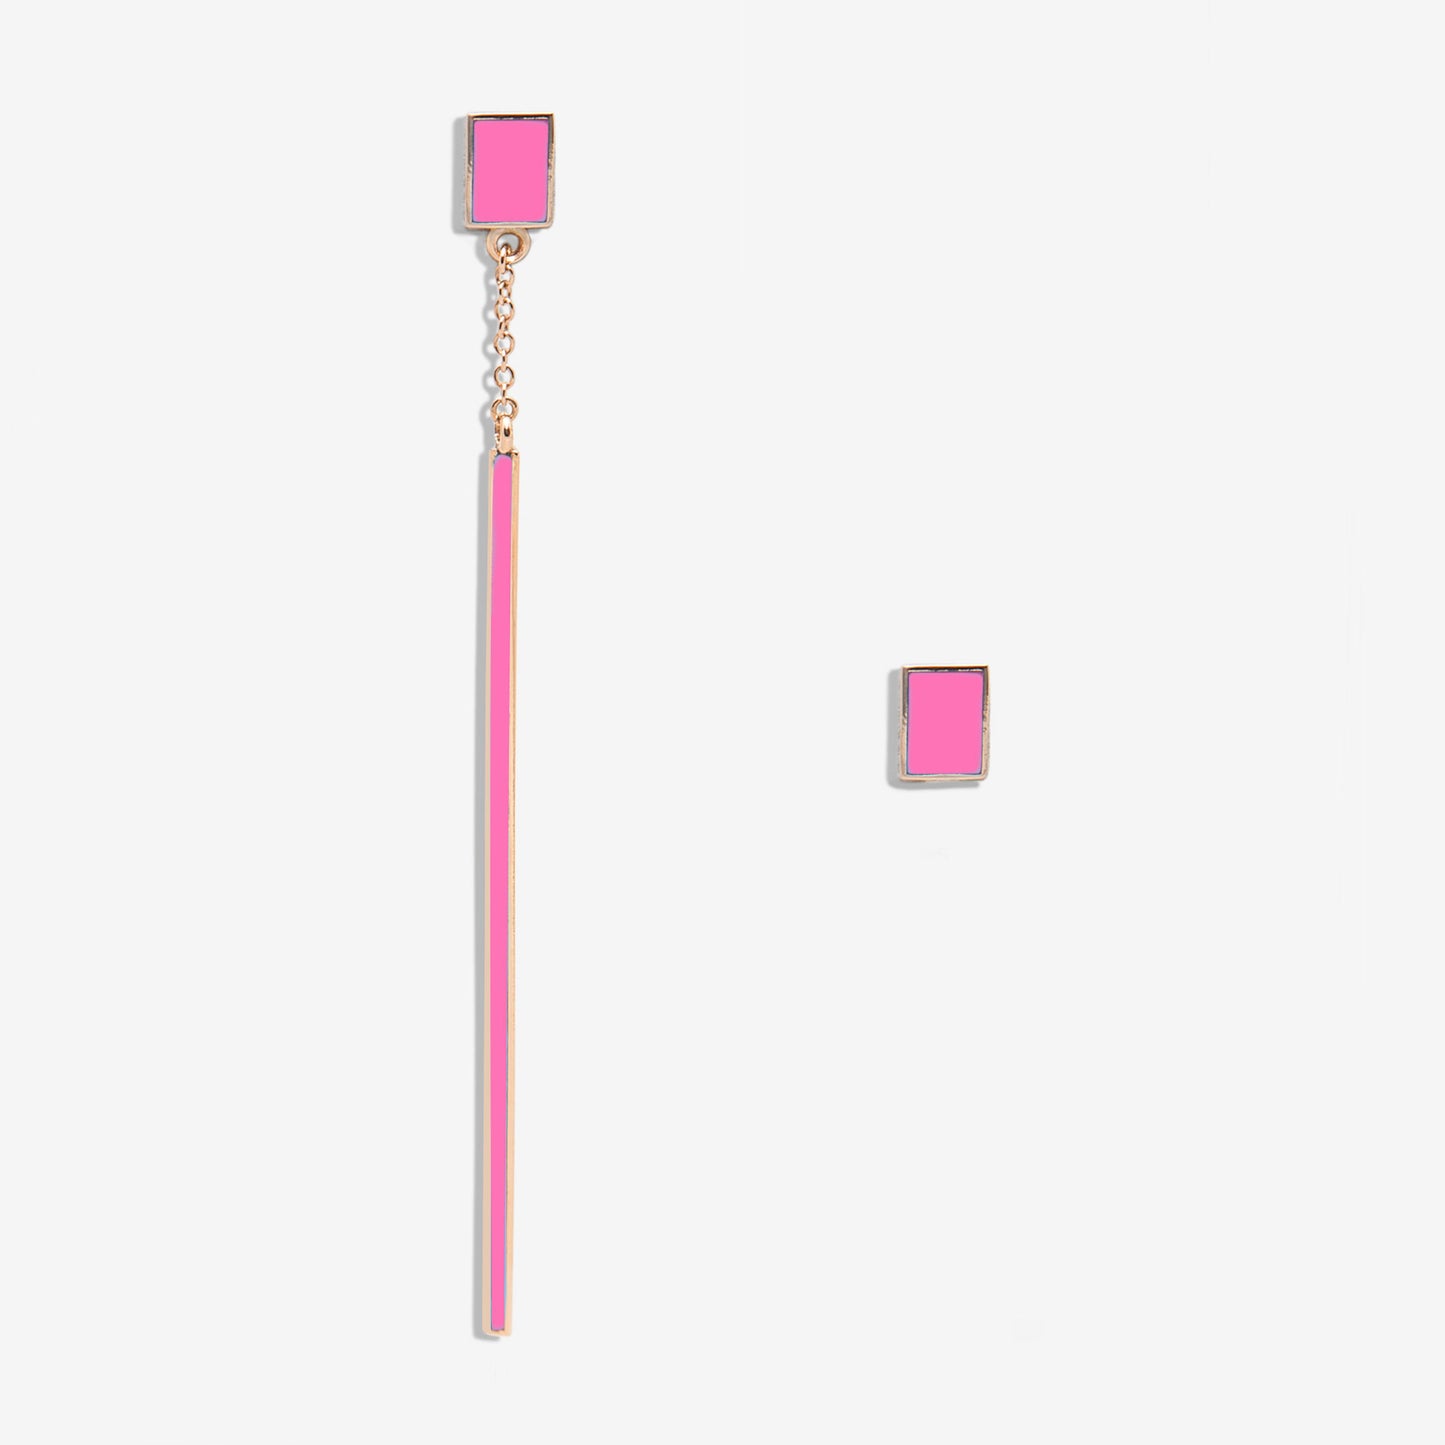 Floating fluo pink drop earring and rectangle